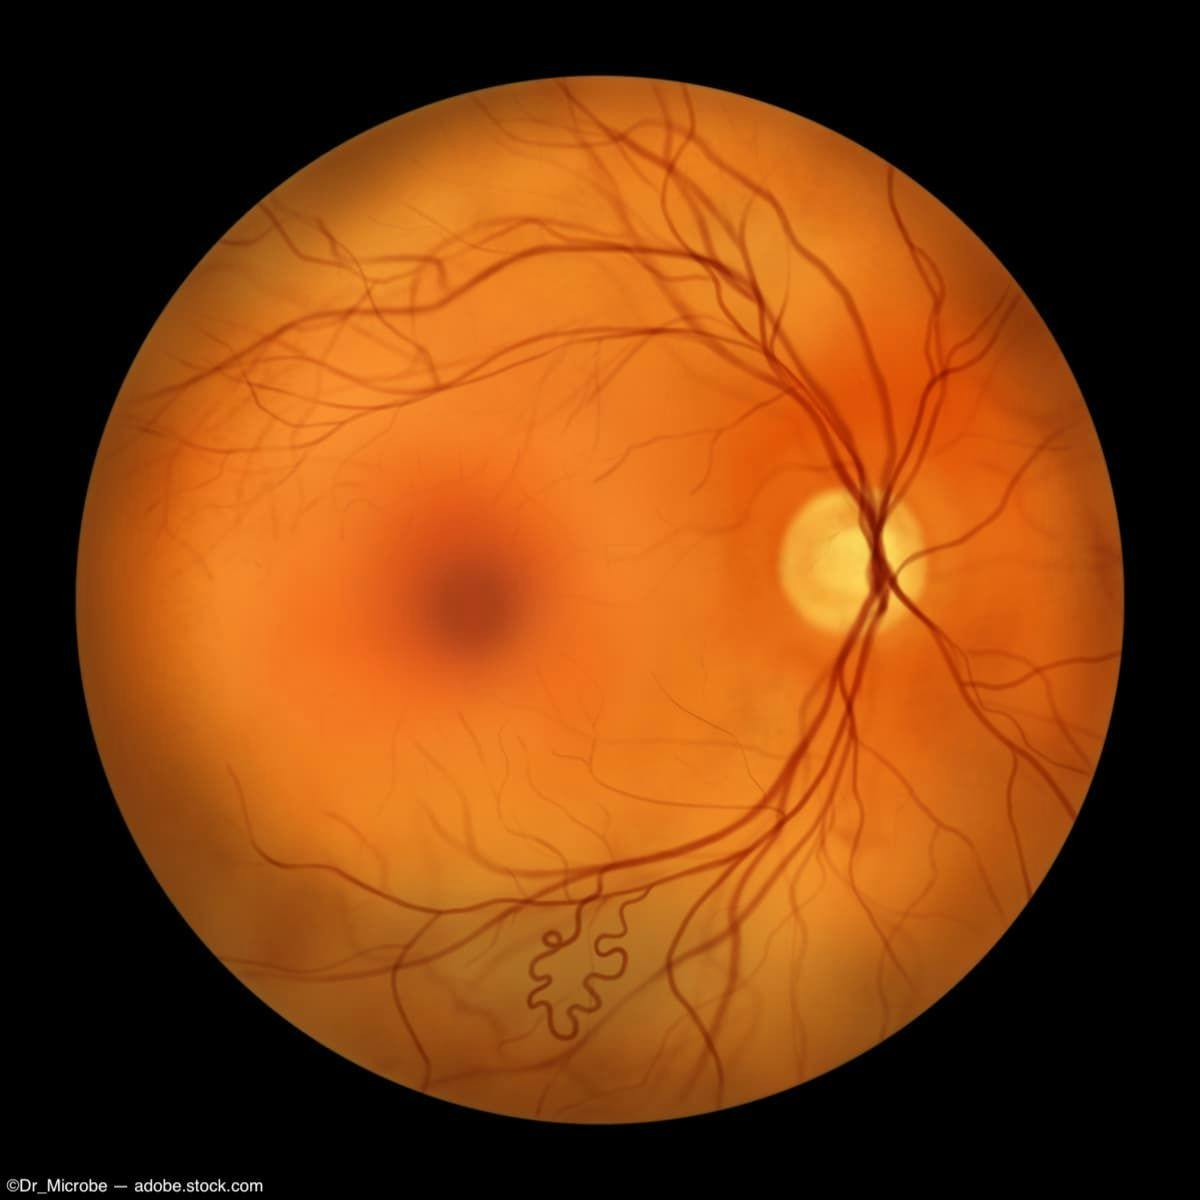 OCT image of retinal vascular structure Image credit: AdobeStock/Dr_Microbe